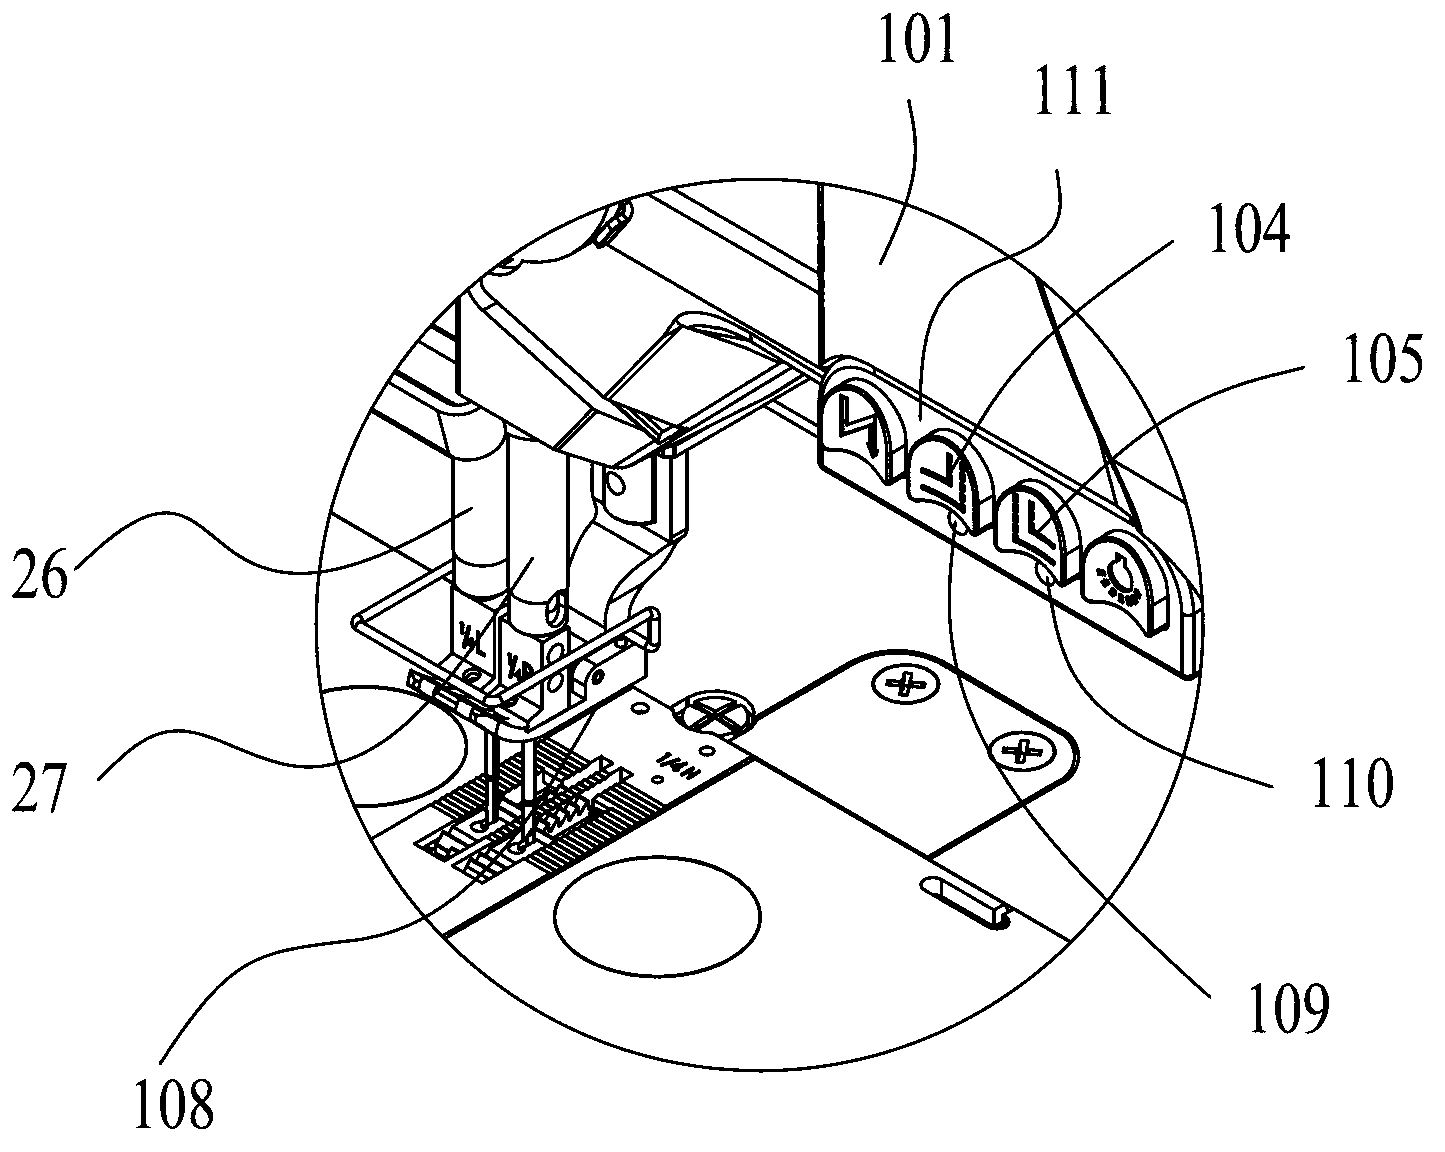 Control method for automatic separation and resetting of needle rods of double-needle machine